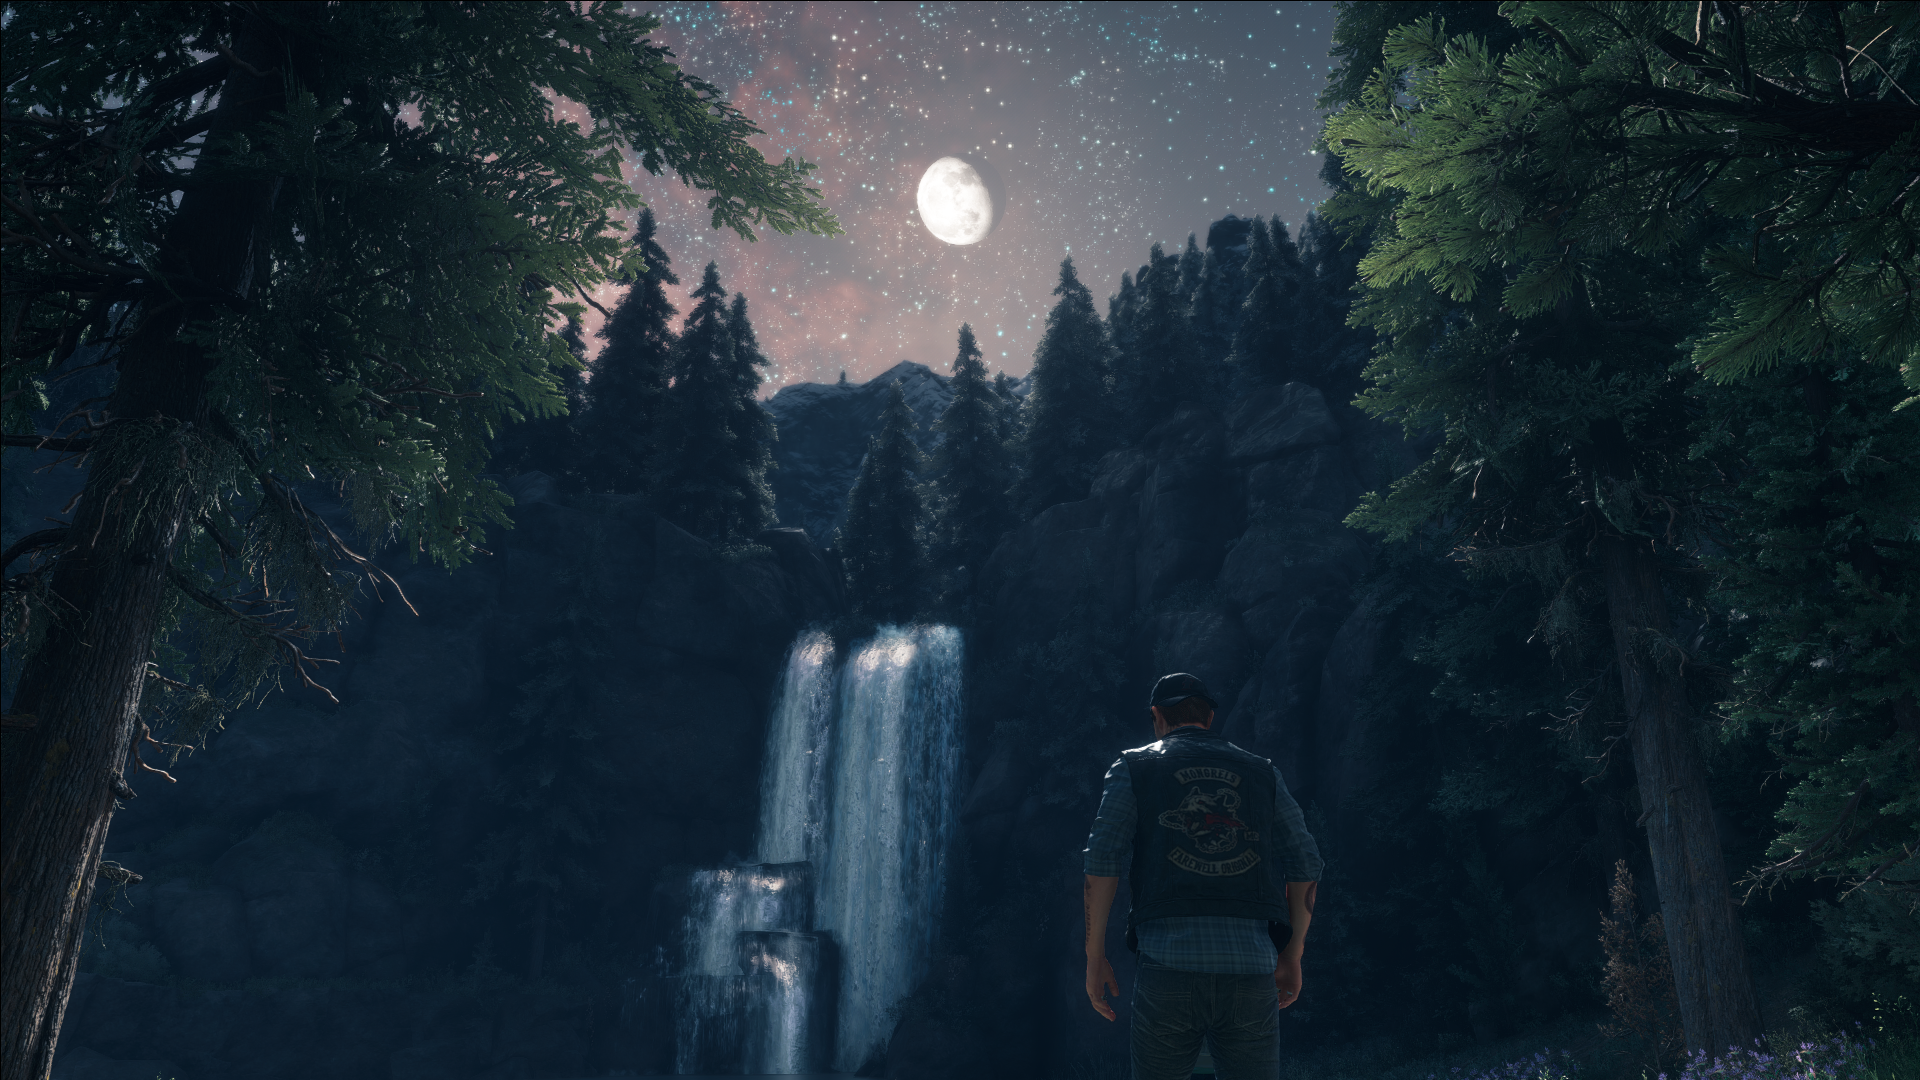 General 1920x1080 Days Gone video games night starscape sky video game men trees video game art screen shot video game characters CGI Moon moonlight standing stars hat waterfall nature